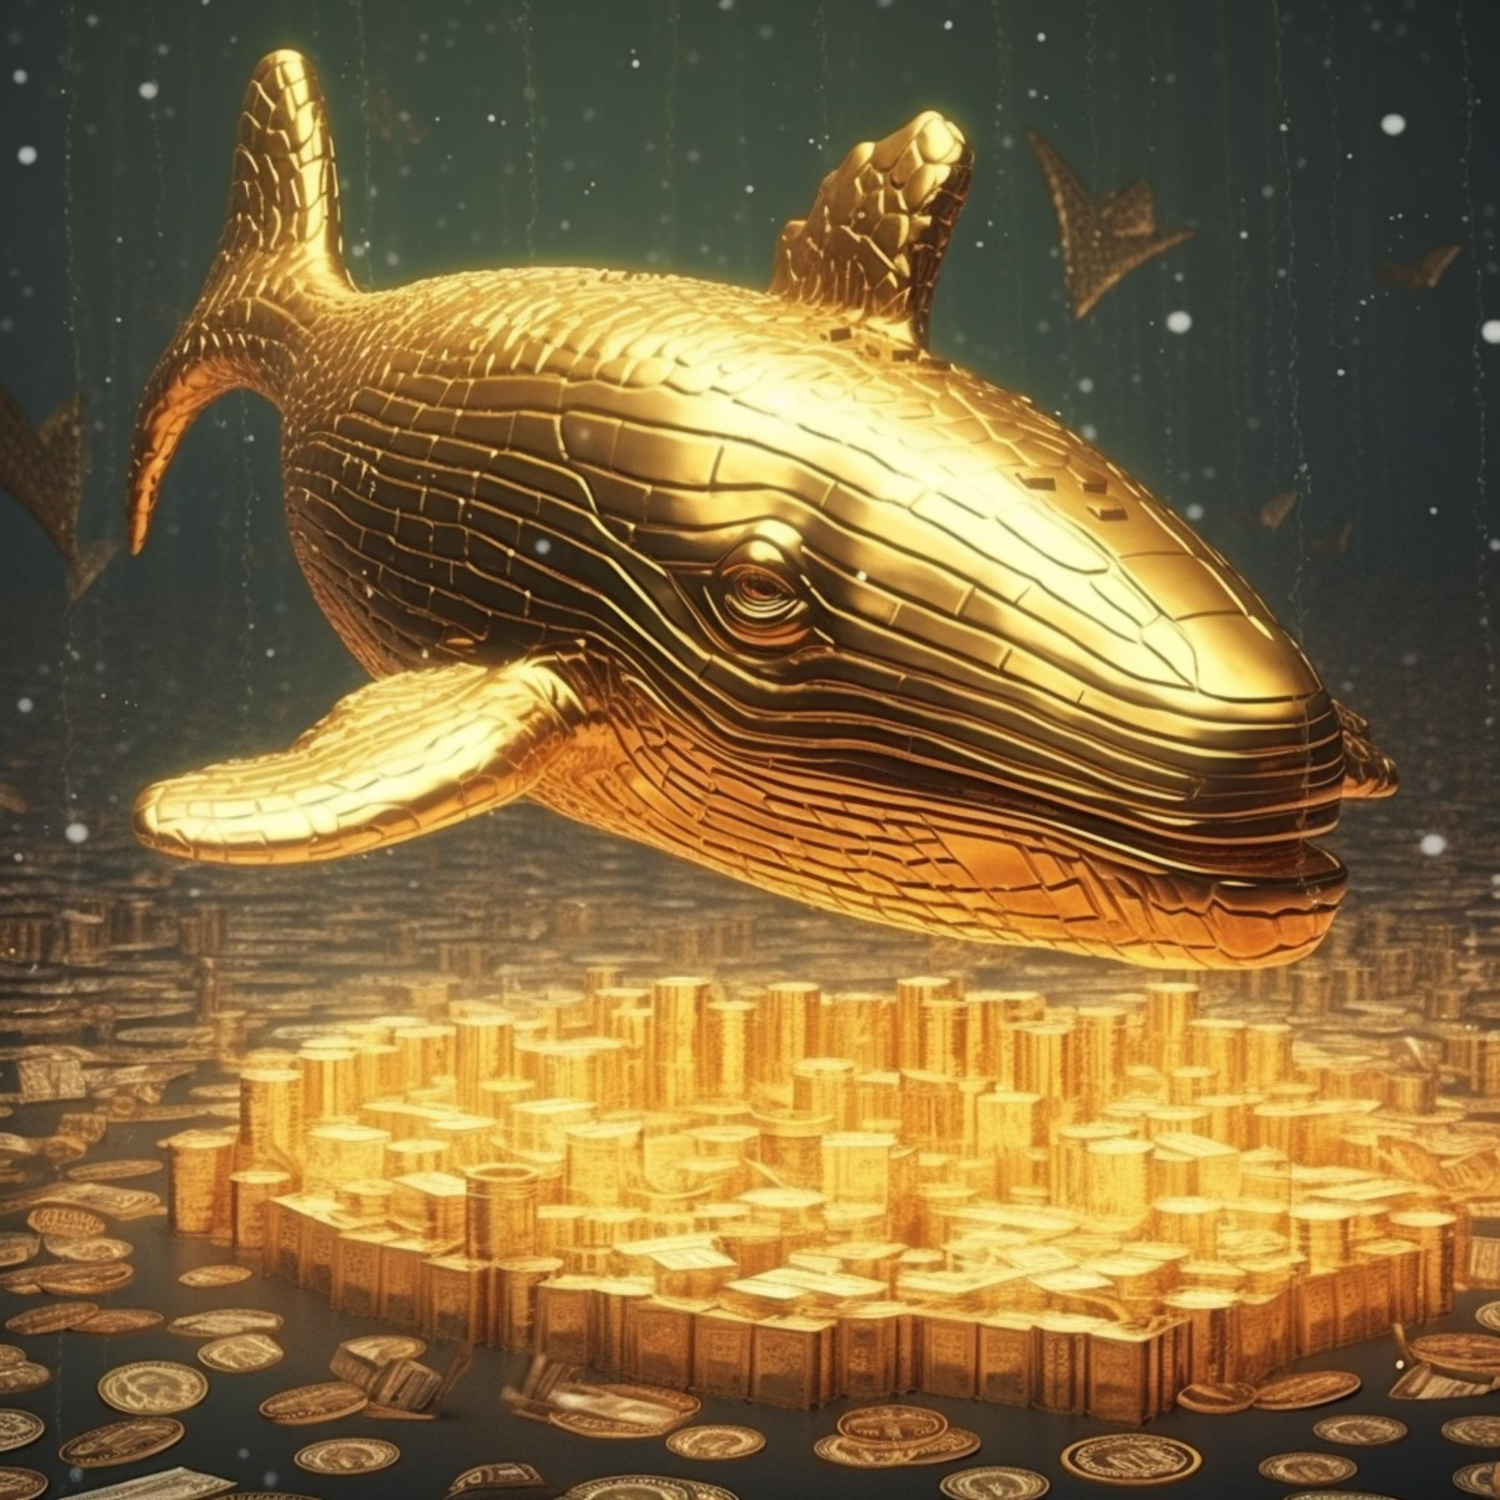 Whales Leaving $SHIB for This New Memecoin? 